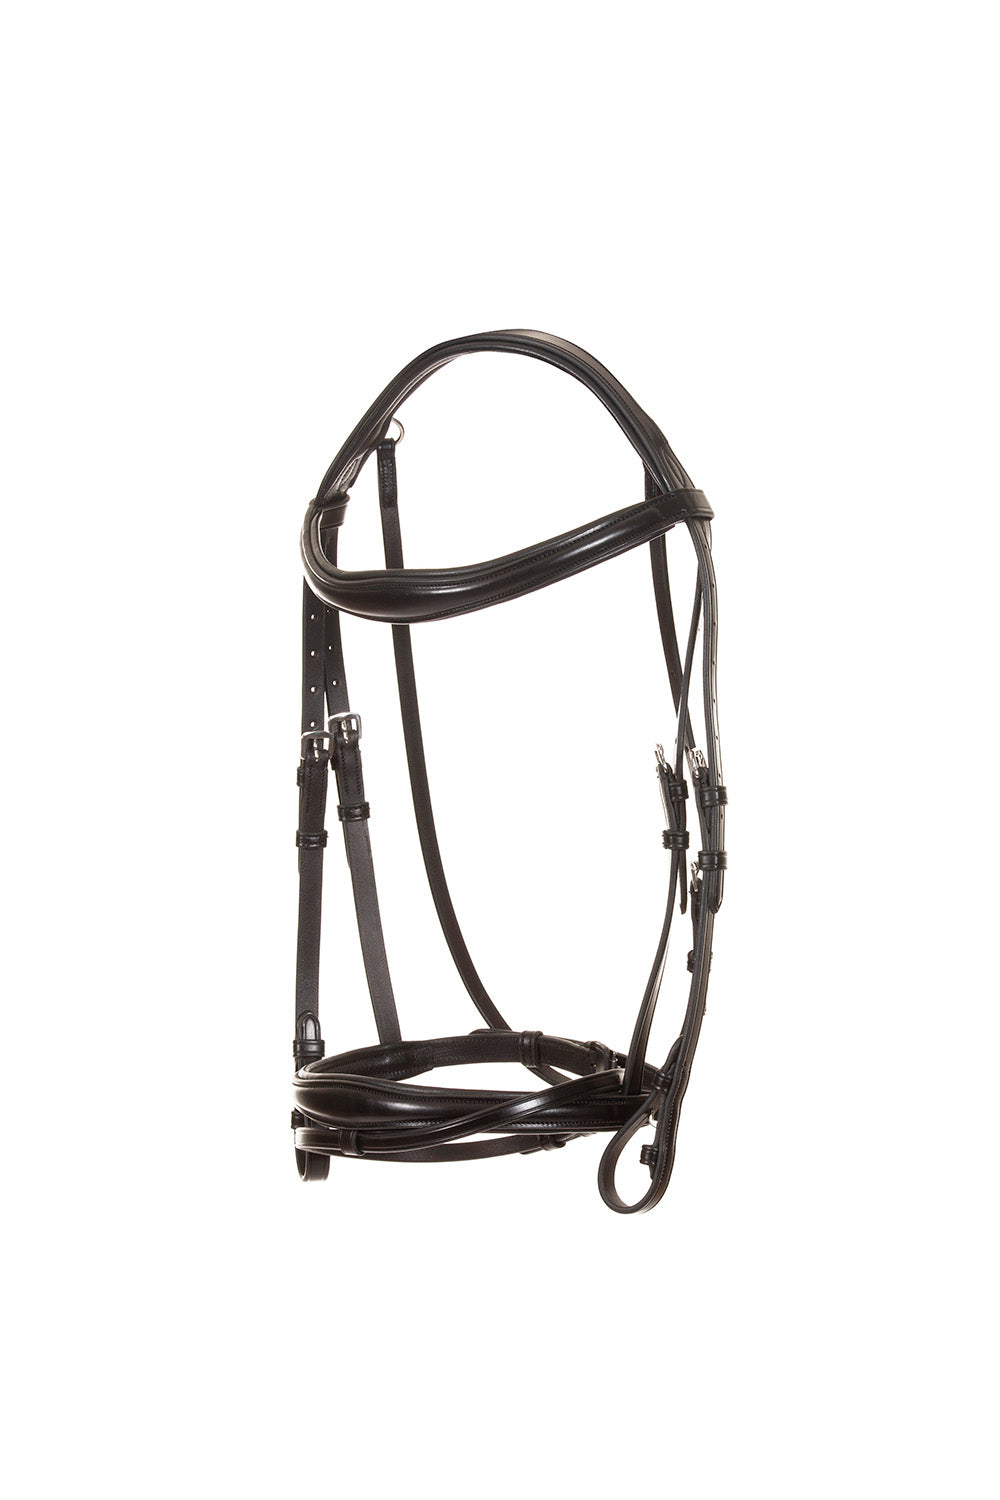 leather bridle | anatomical headpiece | convex noseband | Makebe | Stable line